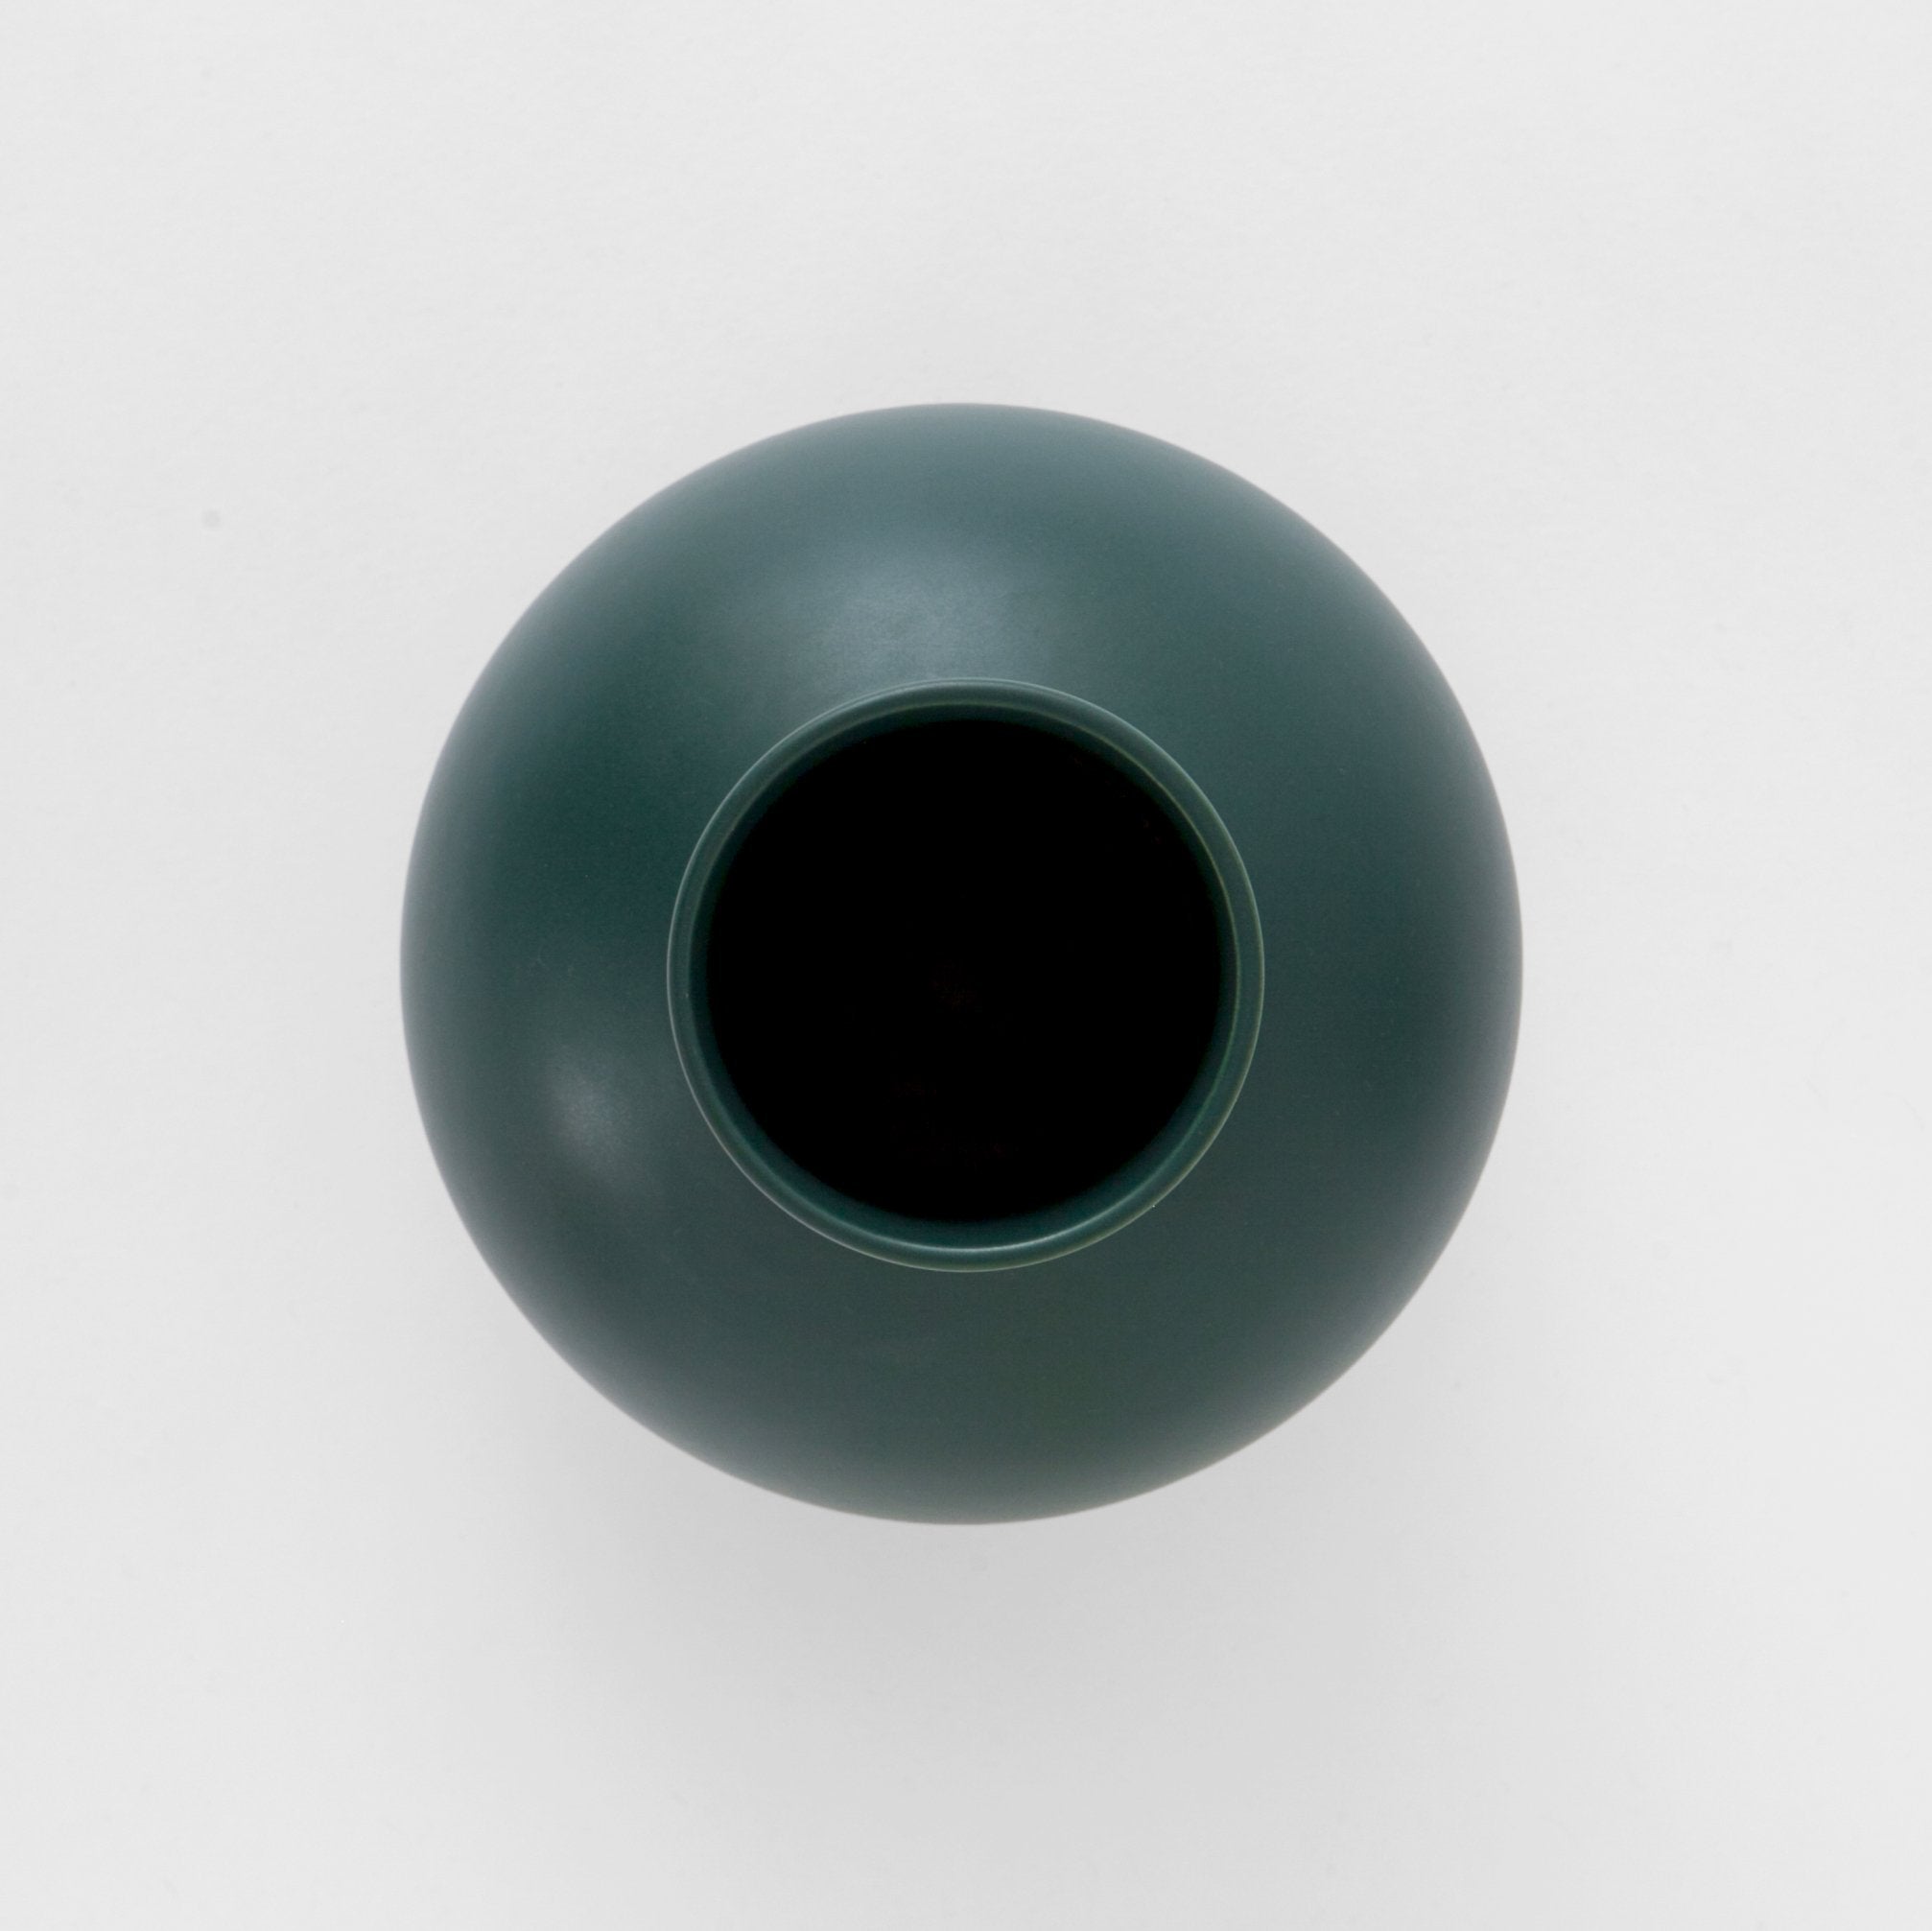 Large Vase Strøm Earthenware · €82.5 · RAAWII | CURATED BY EYEDS